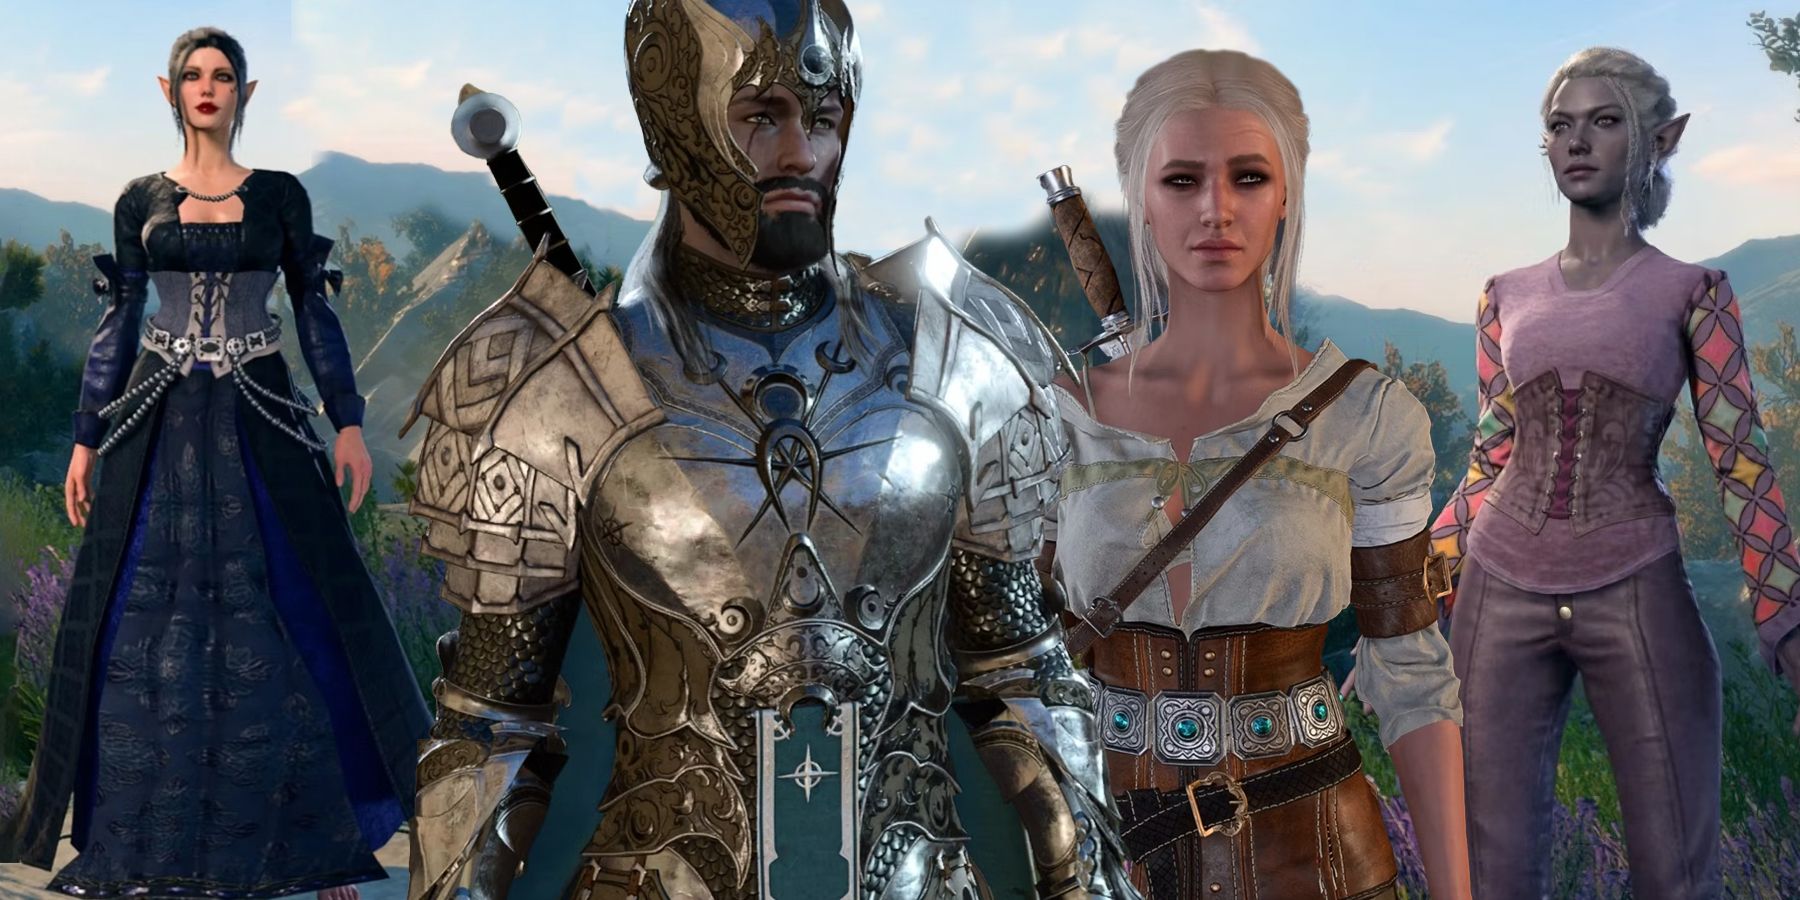 10 Most Impractical Female Video Game Armor Sets, Ranked